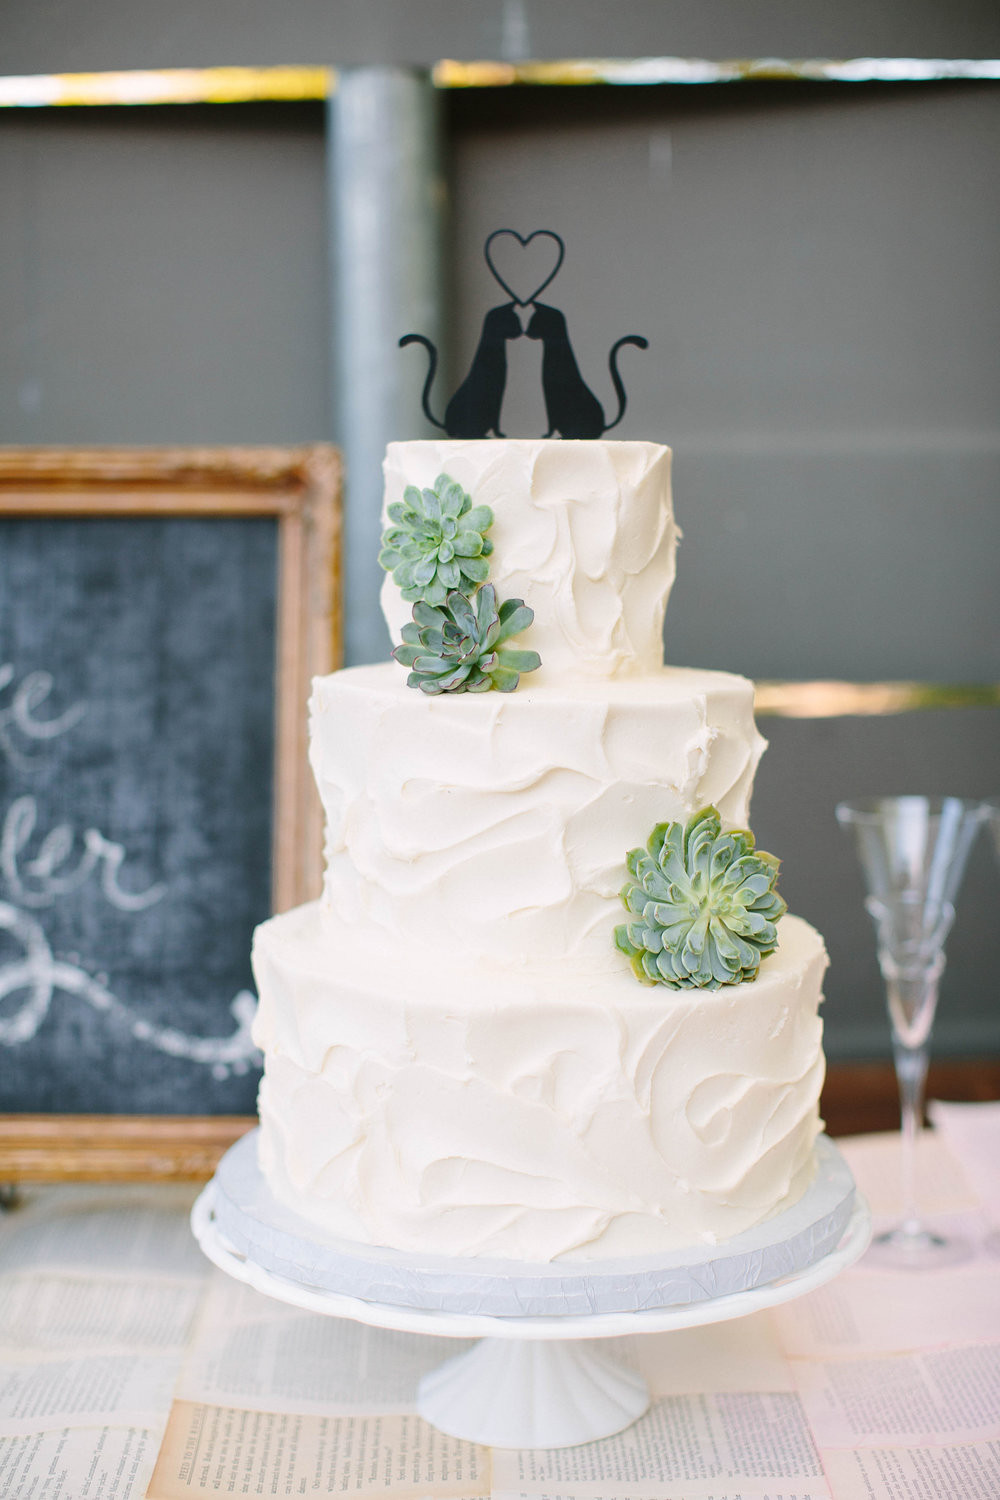 Wedding Cakes In Dallas Tx 20 Of the Best Ideas for Sugar Bee Sweets Bakery • Dallas fort Worth Wedding Cake